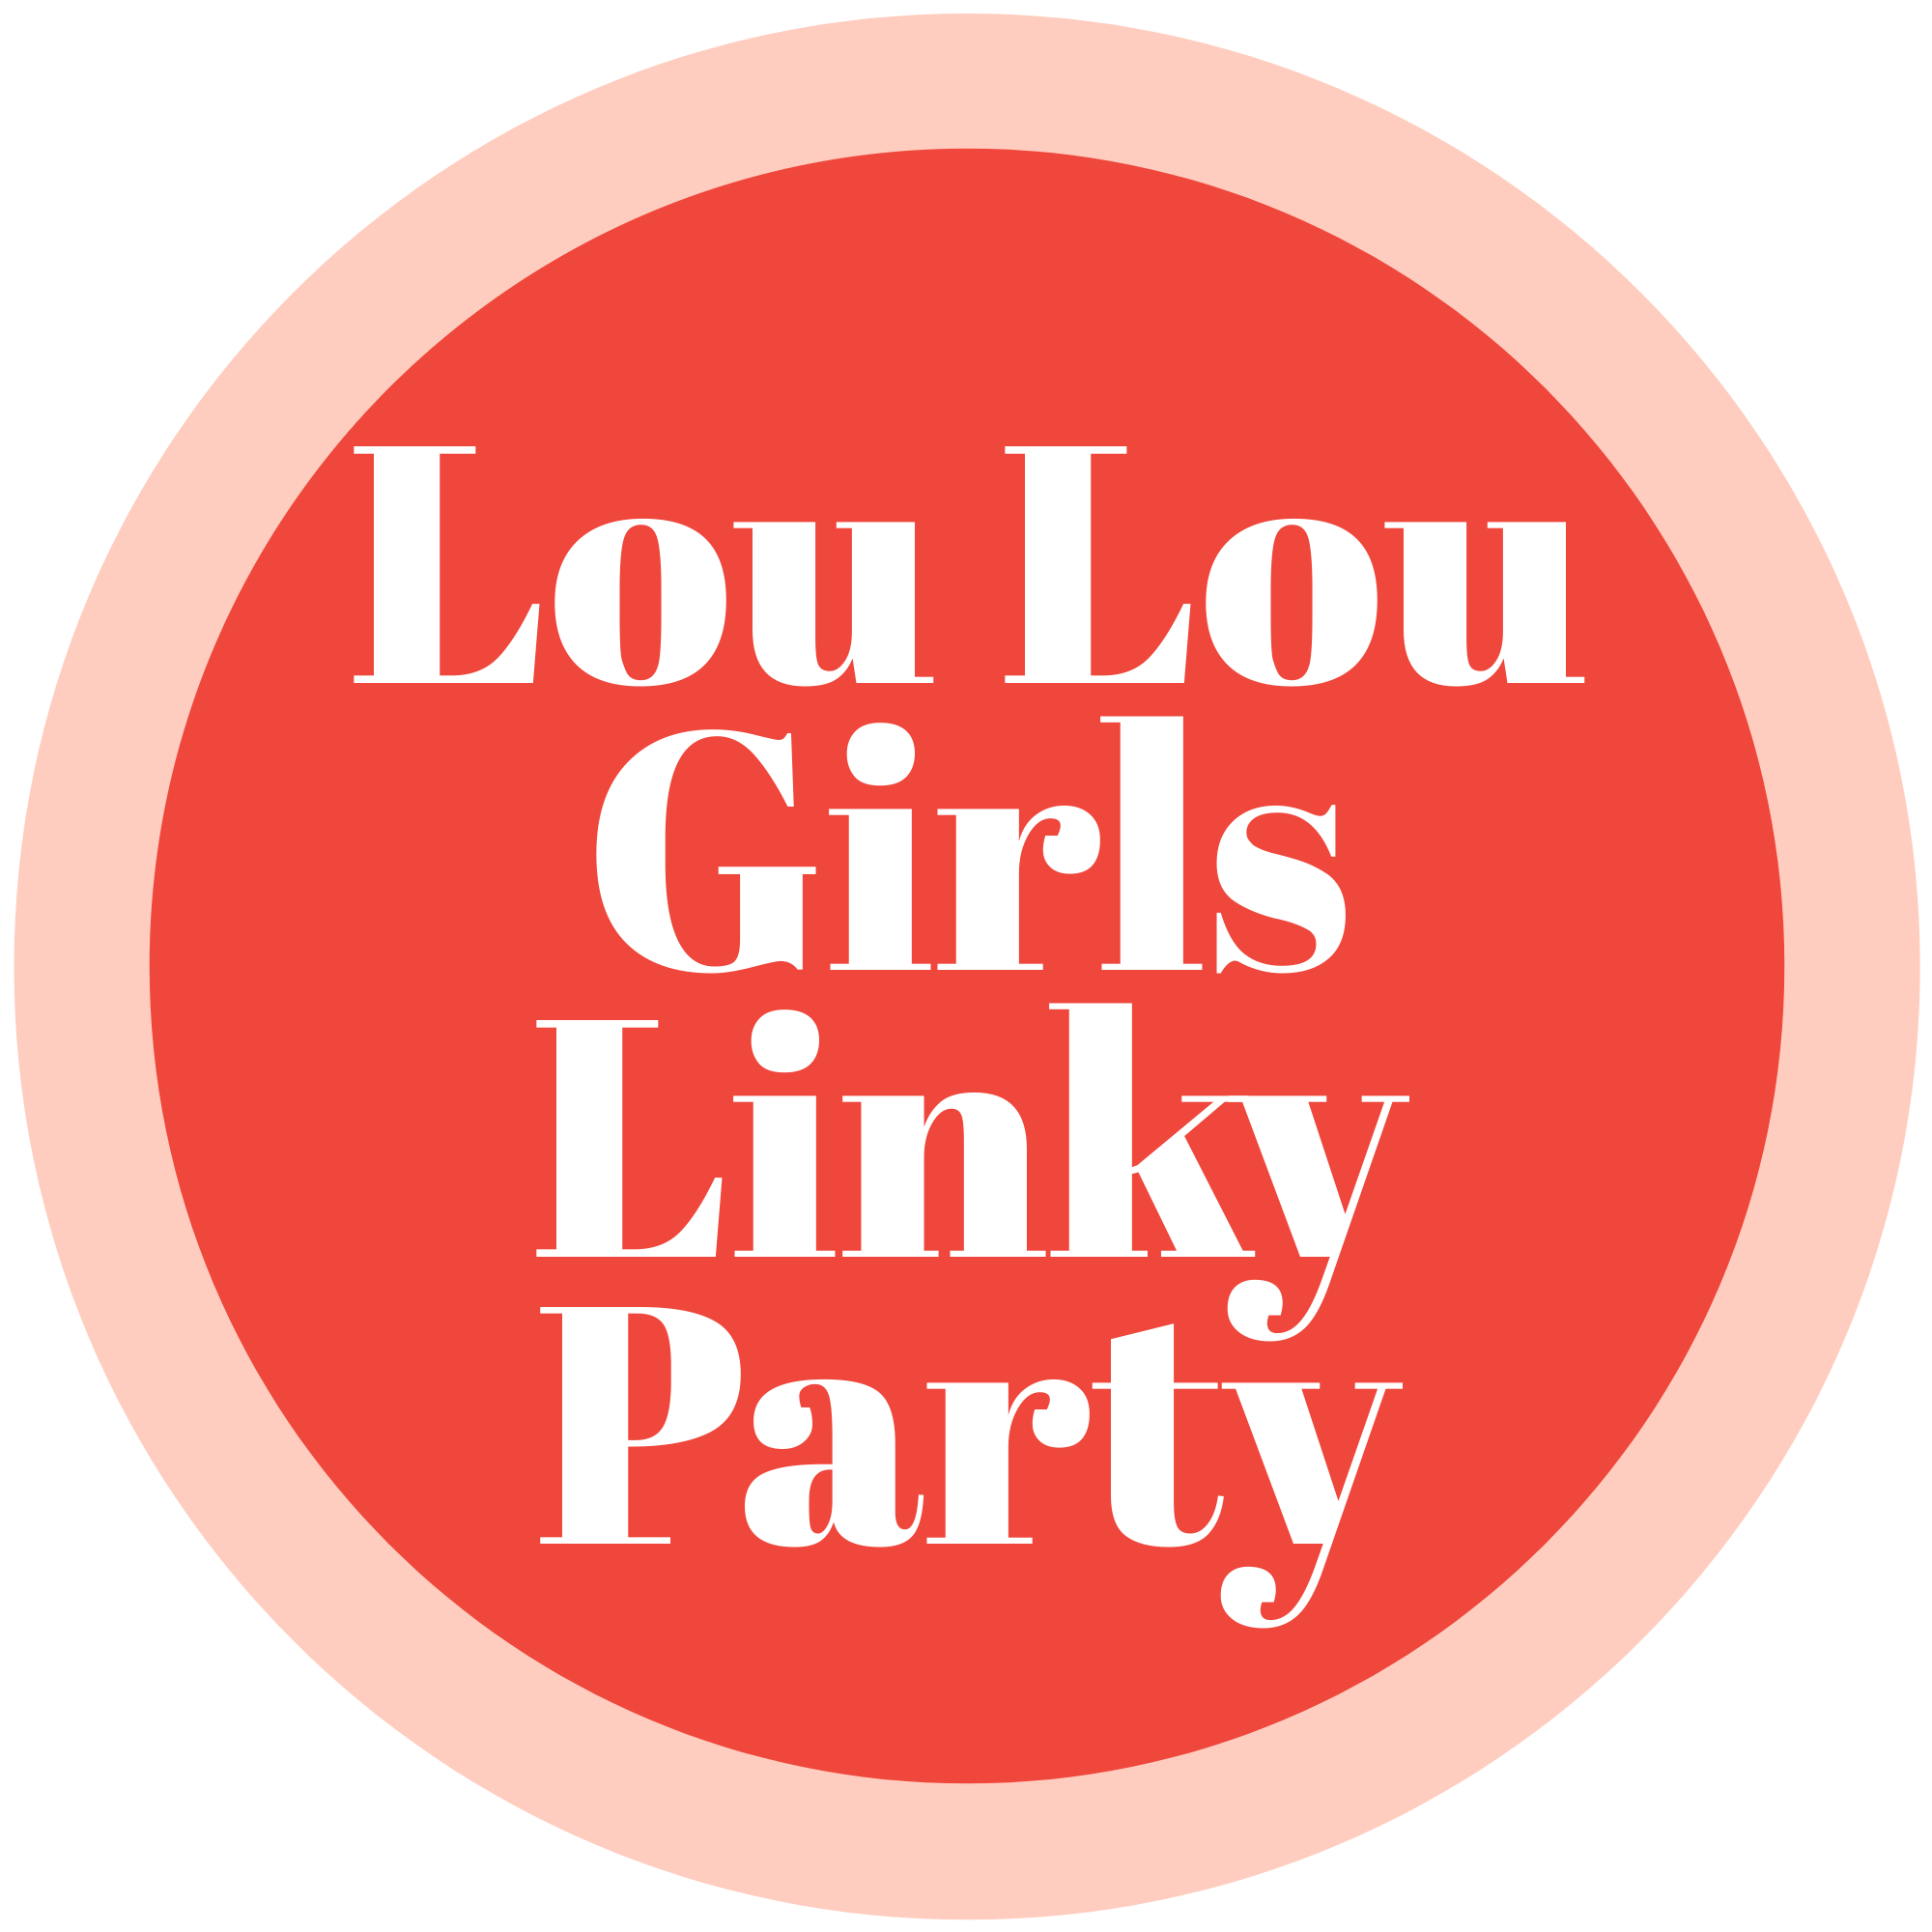 Lou Lou Girls Fabulous Party 490 #linkyparty #bloghop #linkyparties